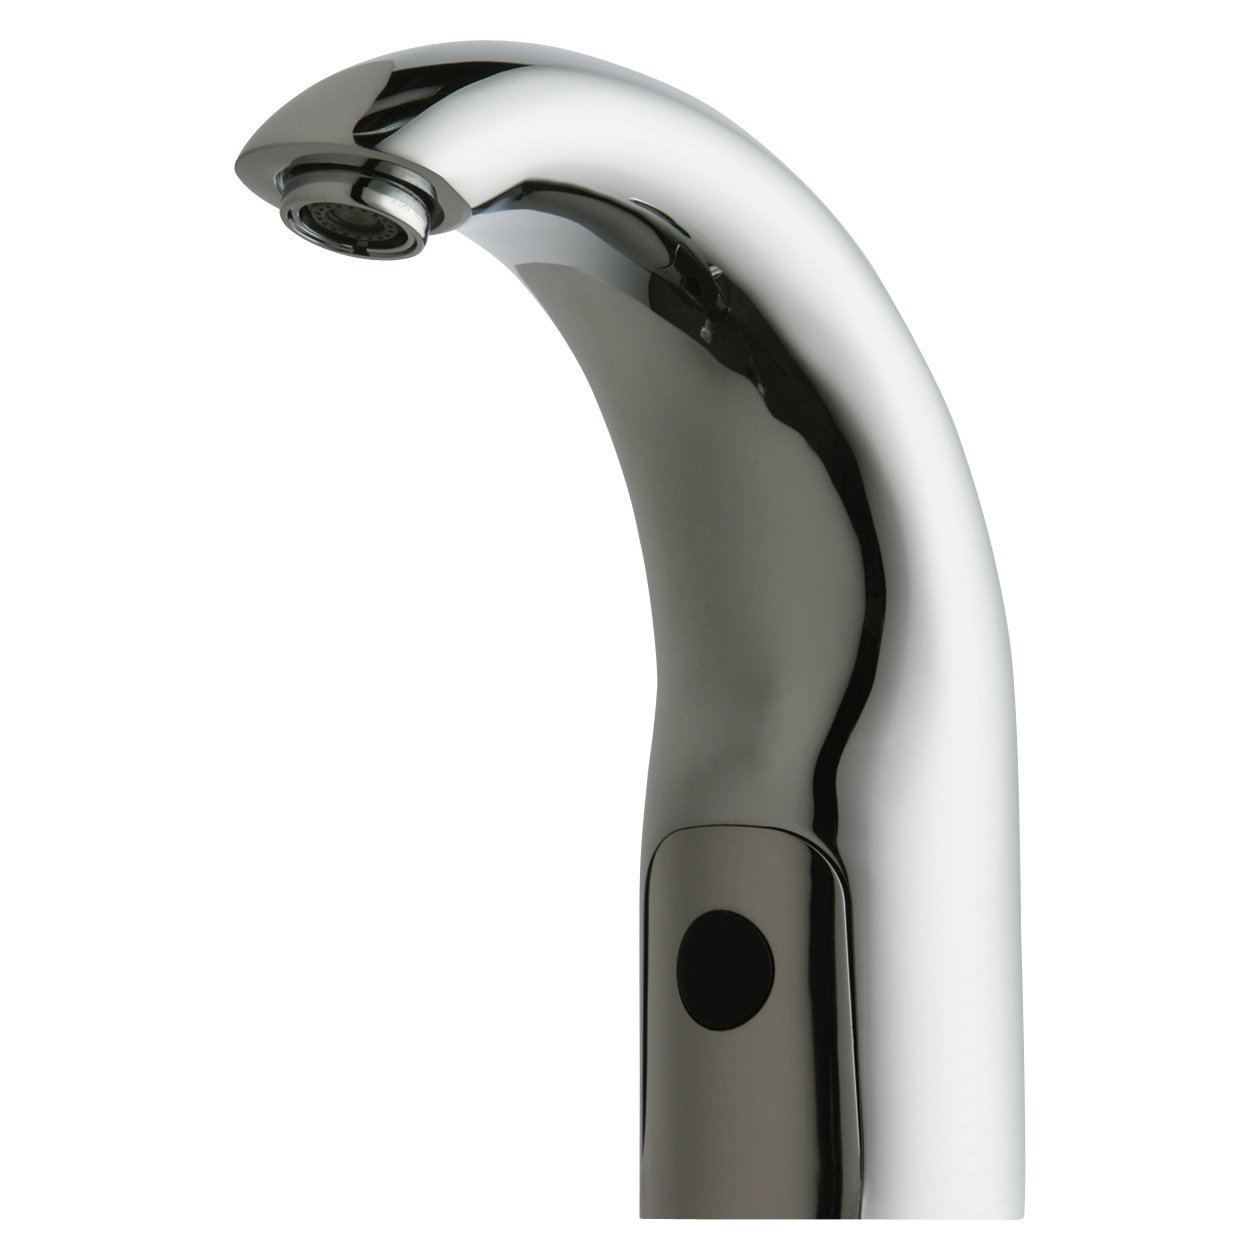 HyTronic Electronic Metering Faucet In Chrome